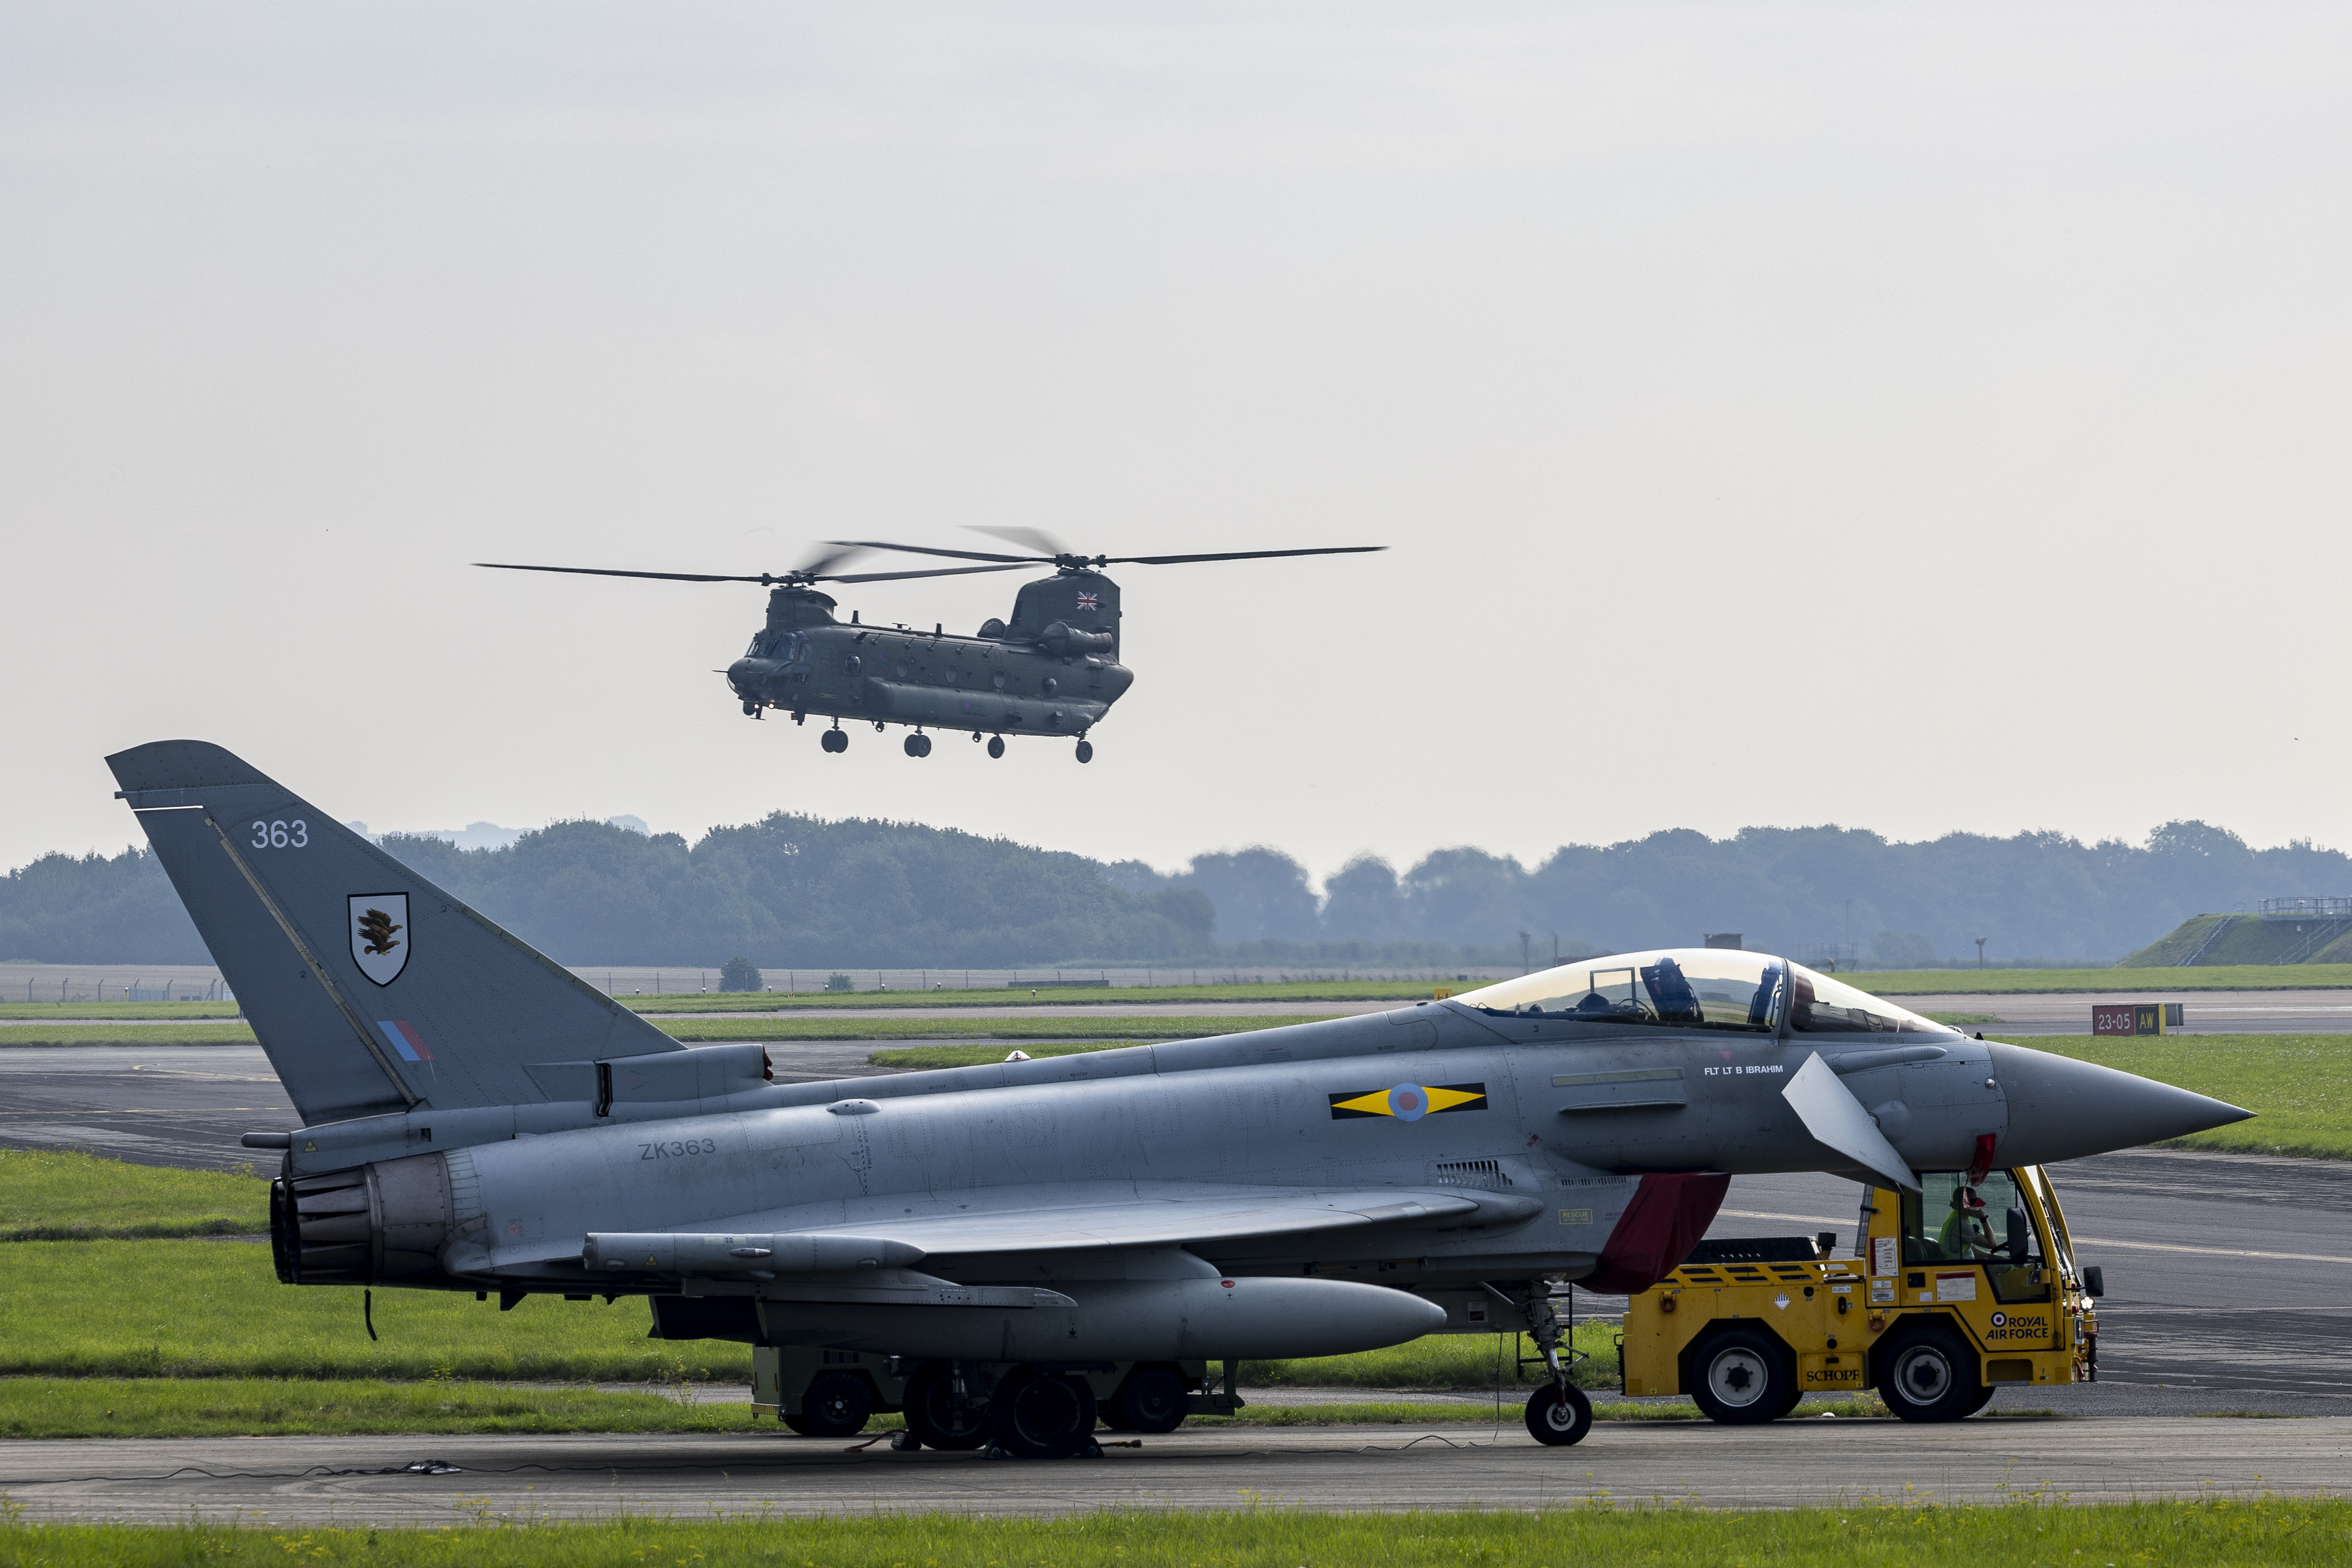 Image shows an RAF Typhoon aircraft on the ground with an RAF Chinook flying low level in the background.